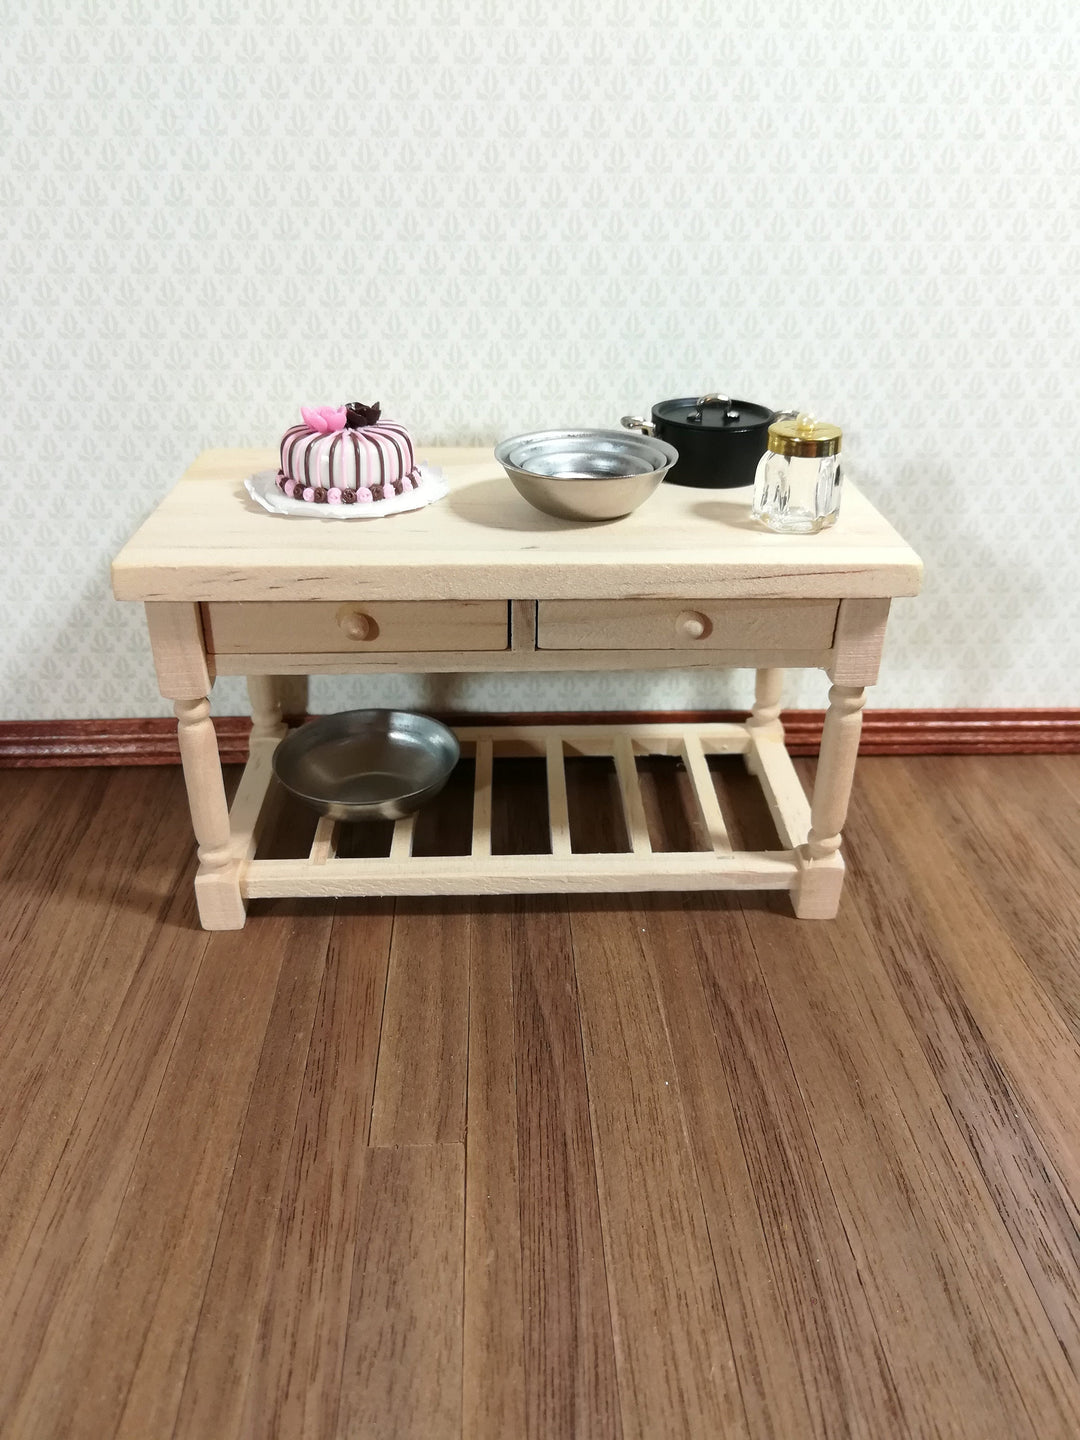 Dollhouse Kitchen Prep Table with Drawers Unpainted Wood 1:12 Scale Miniature Furniture